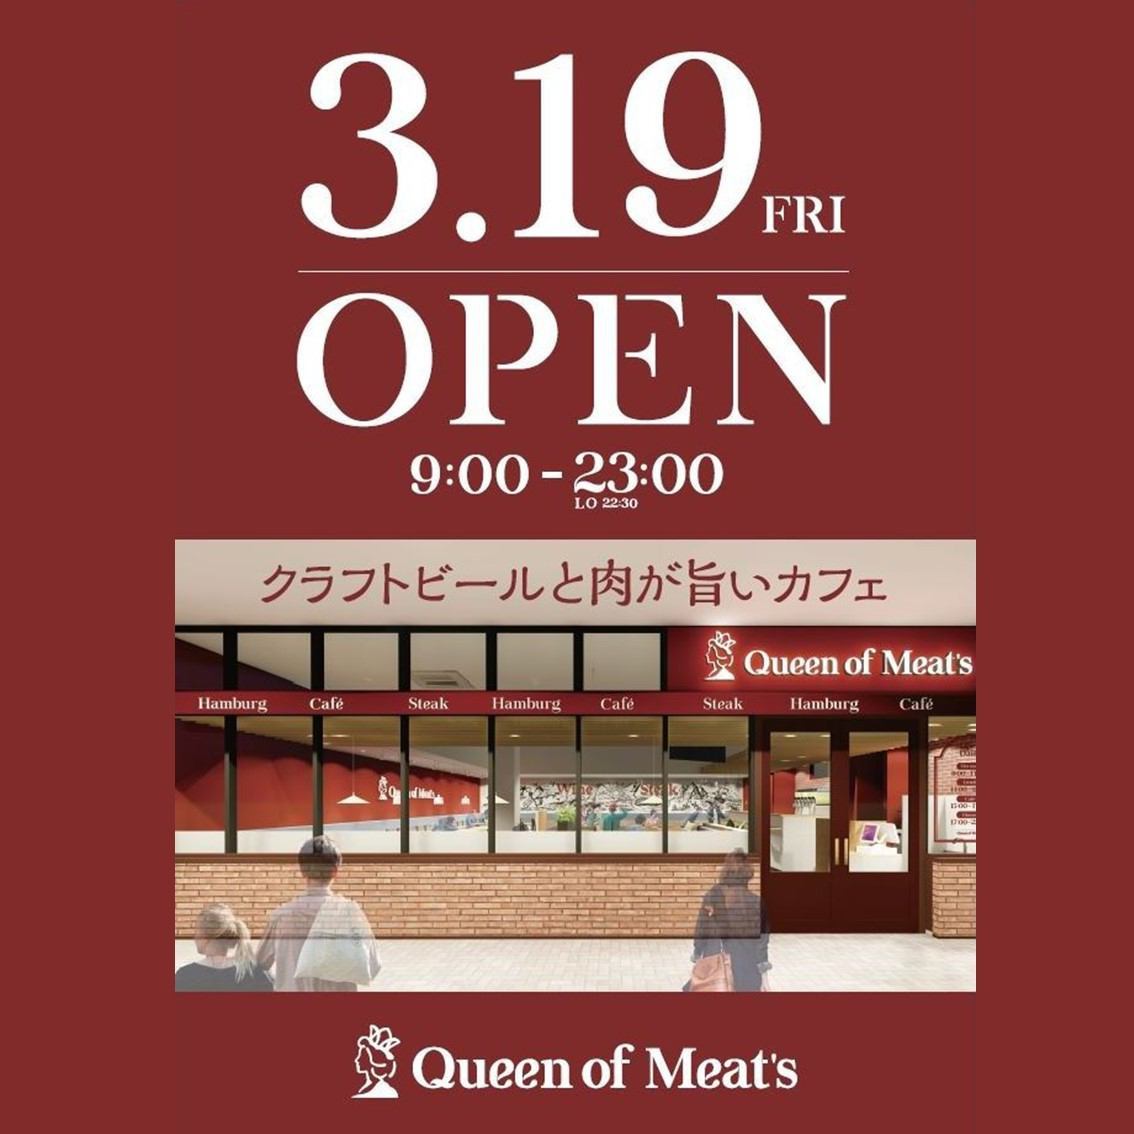 <3/19 Fri OPEN> Delicious meat anytime, anywhere !! Queen of Meat's